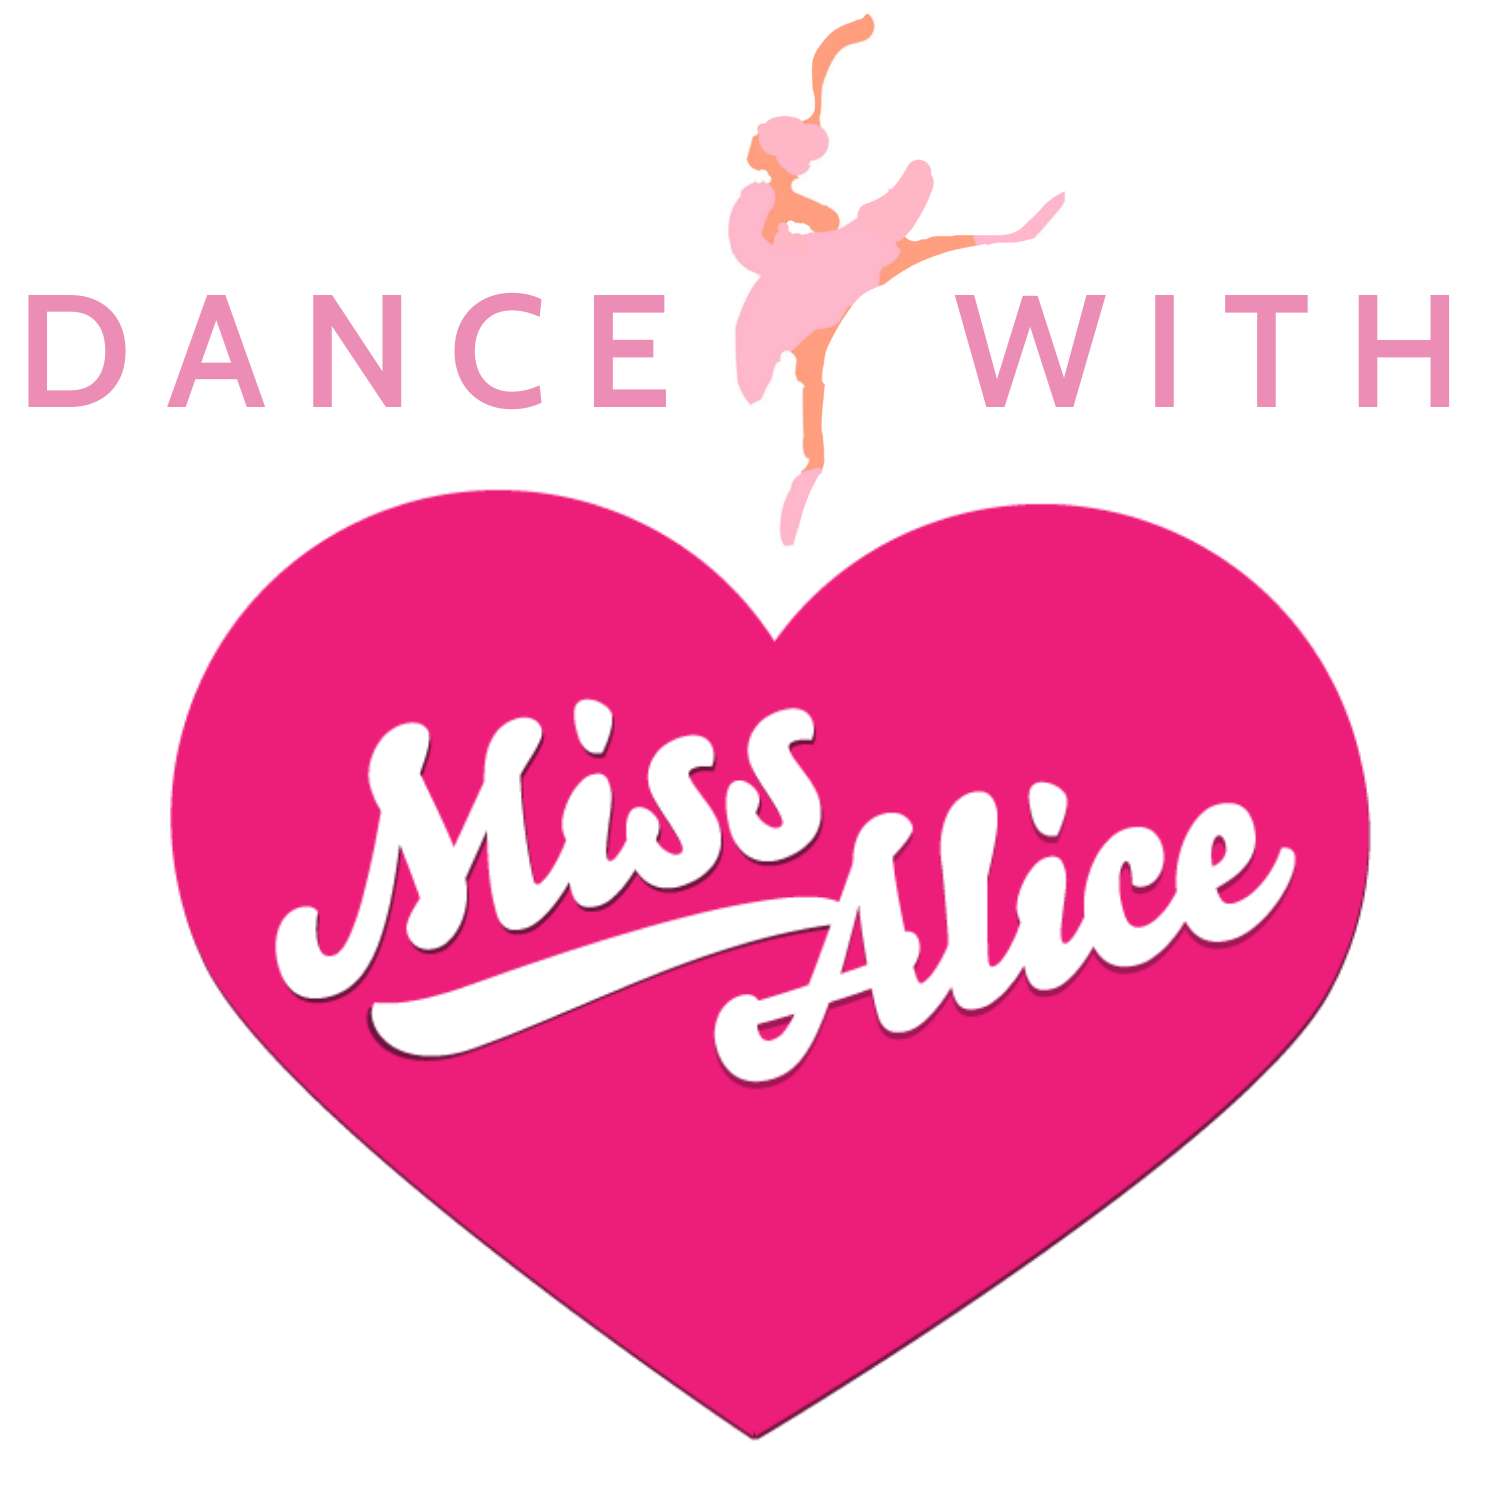 Dance with Miss Alice